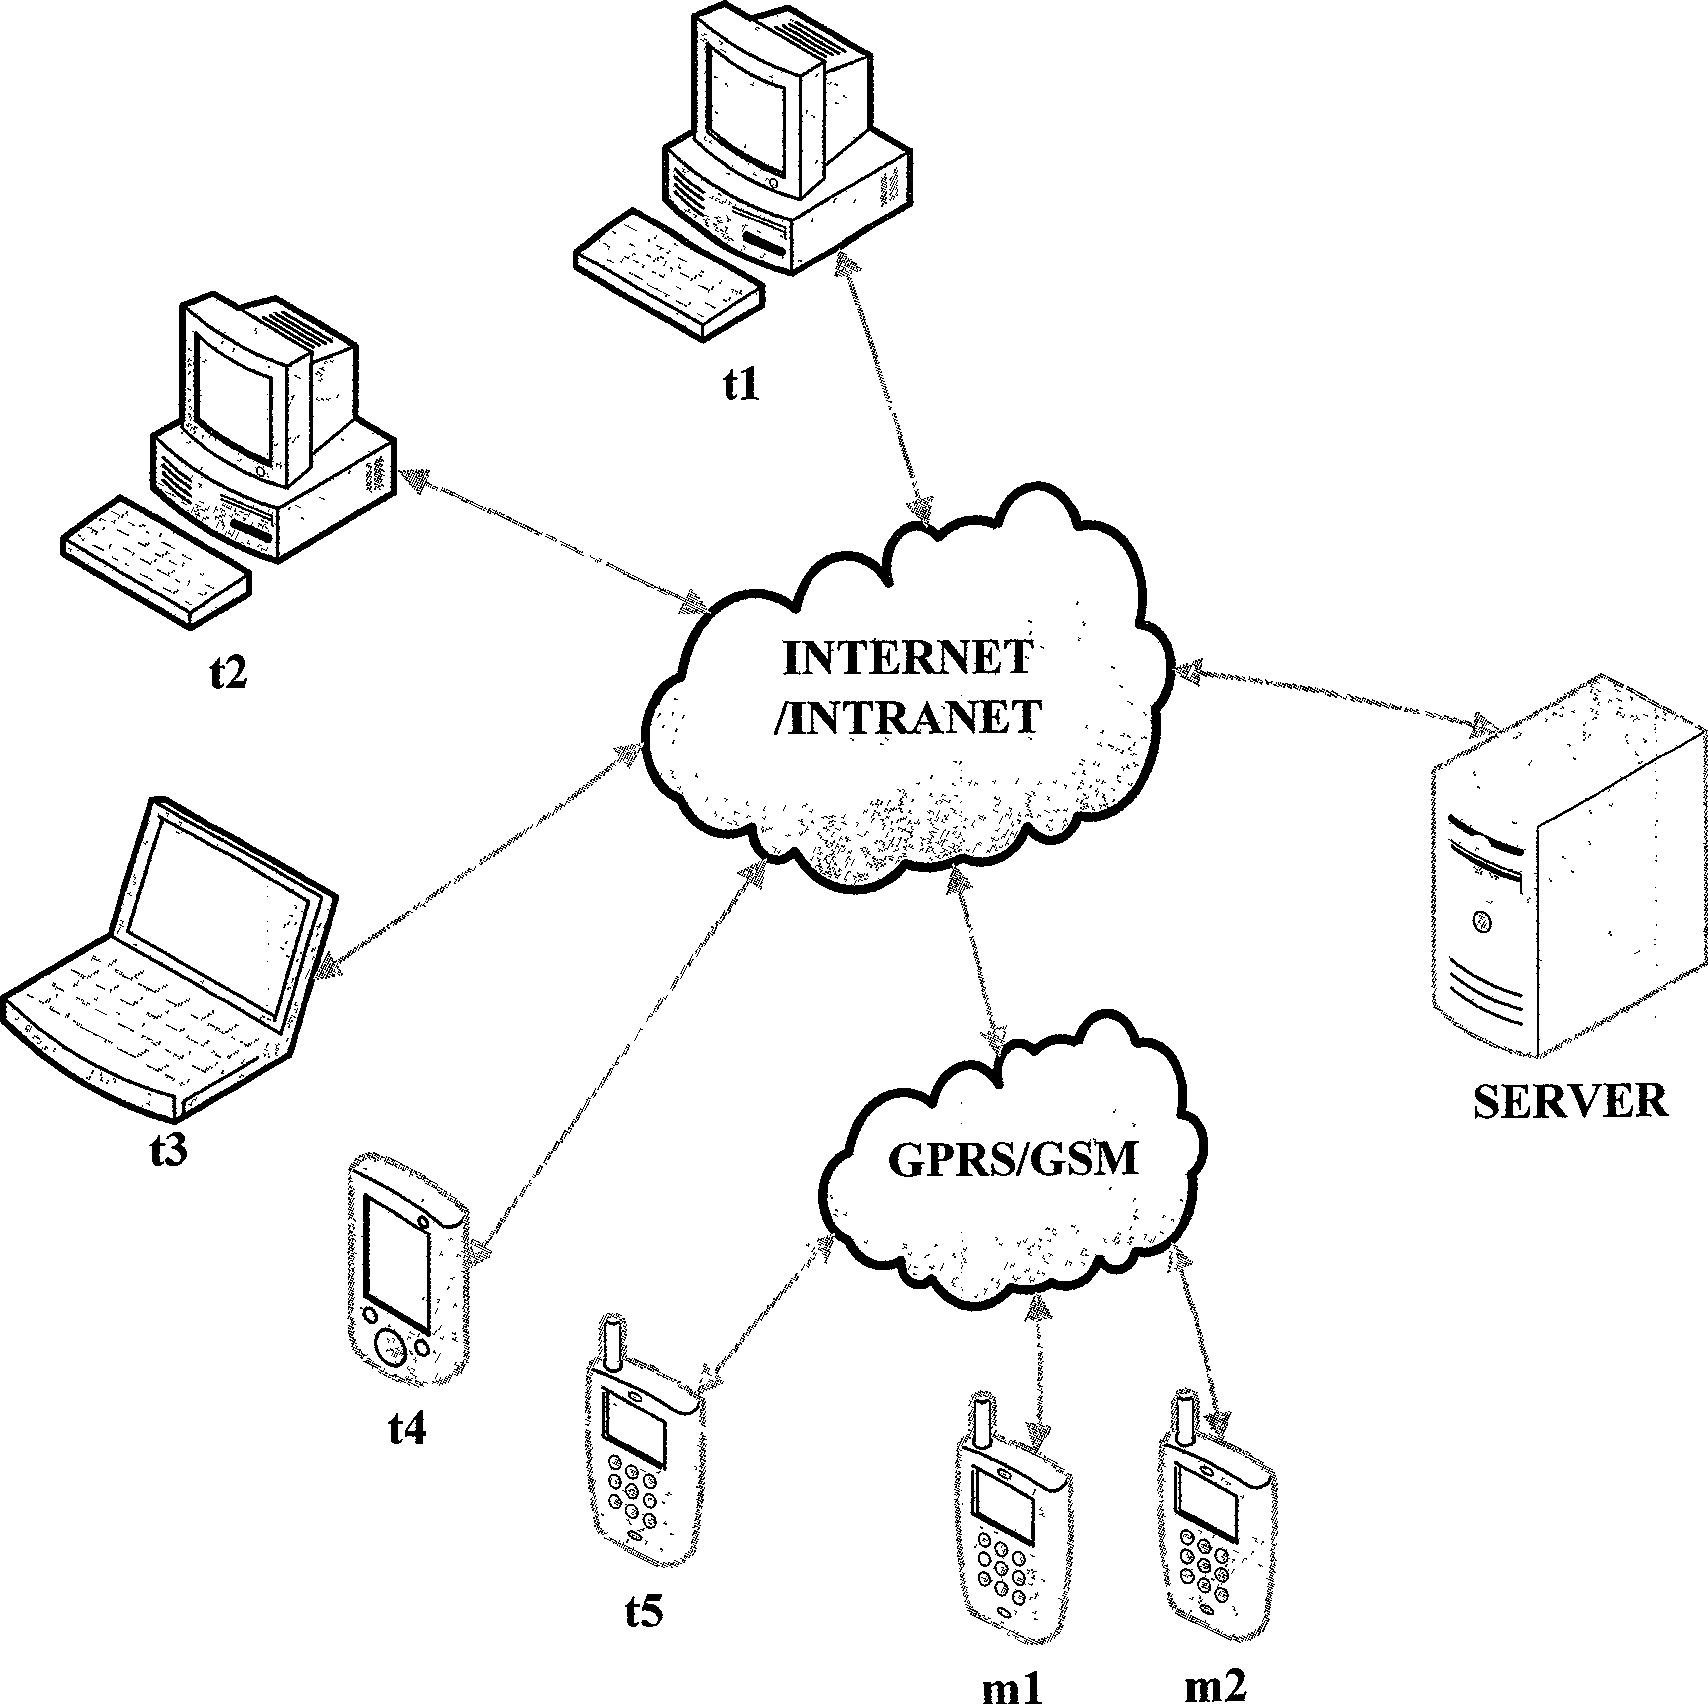 Method for structural information issue and search at network environment